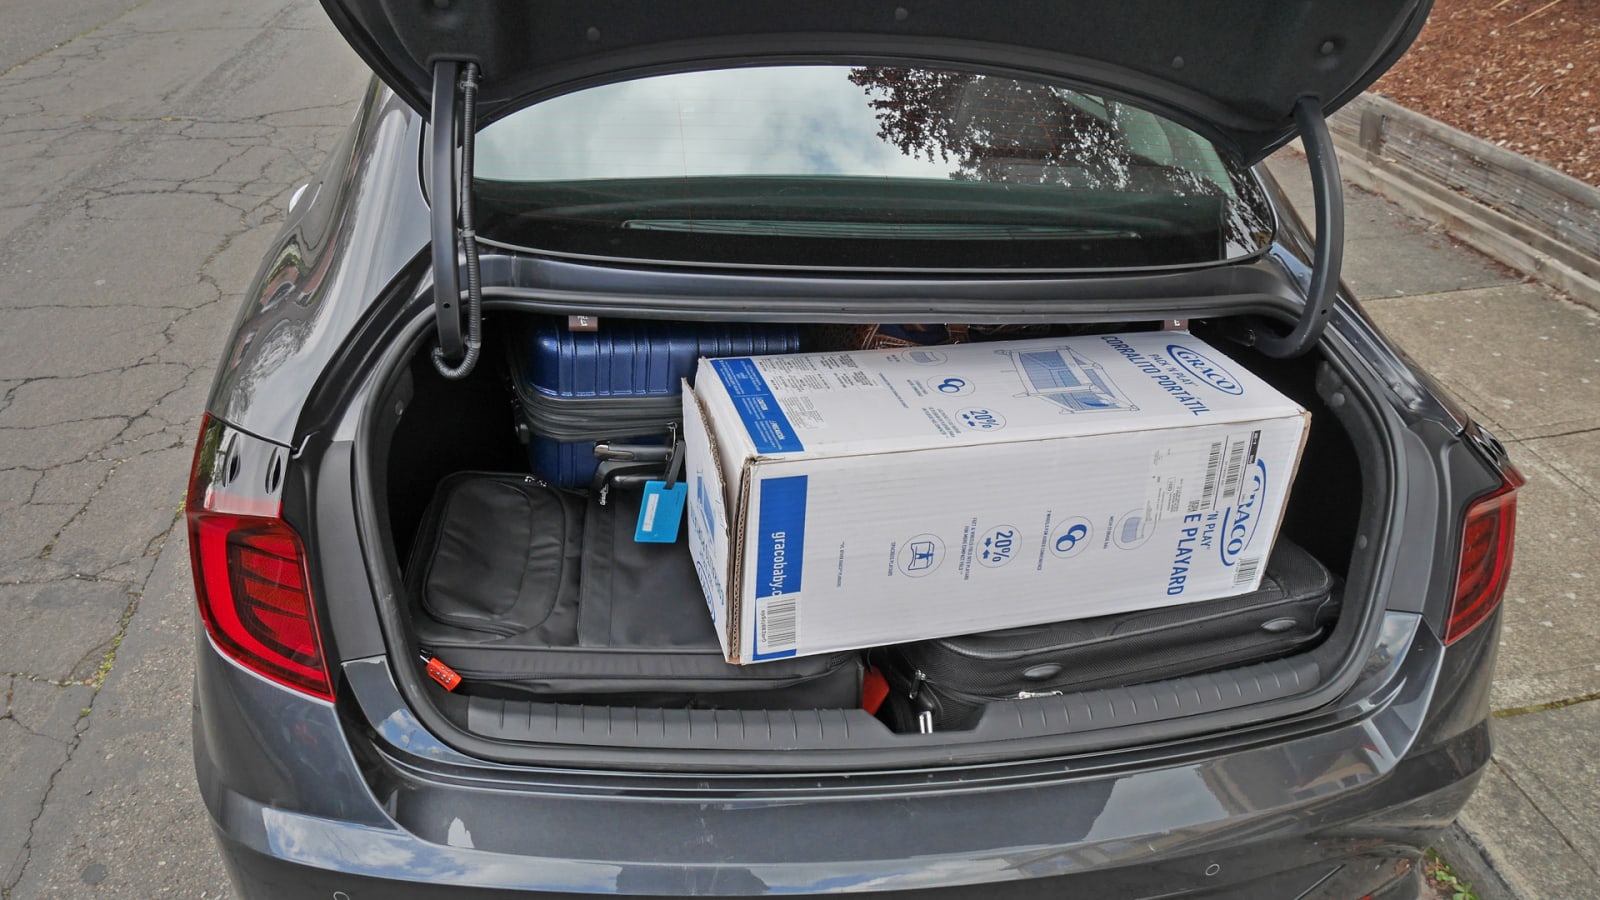 2020 Hyundai Sonata Luggage Test | How much fits in the trunk?